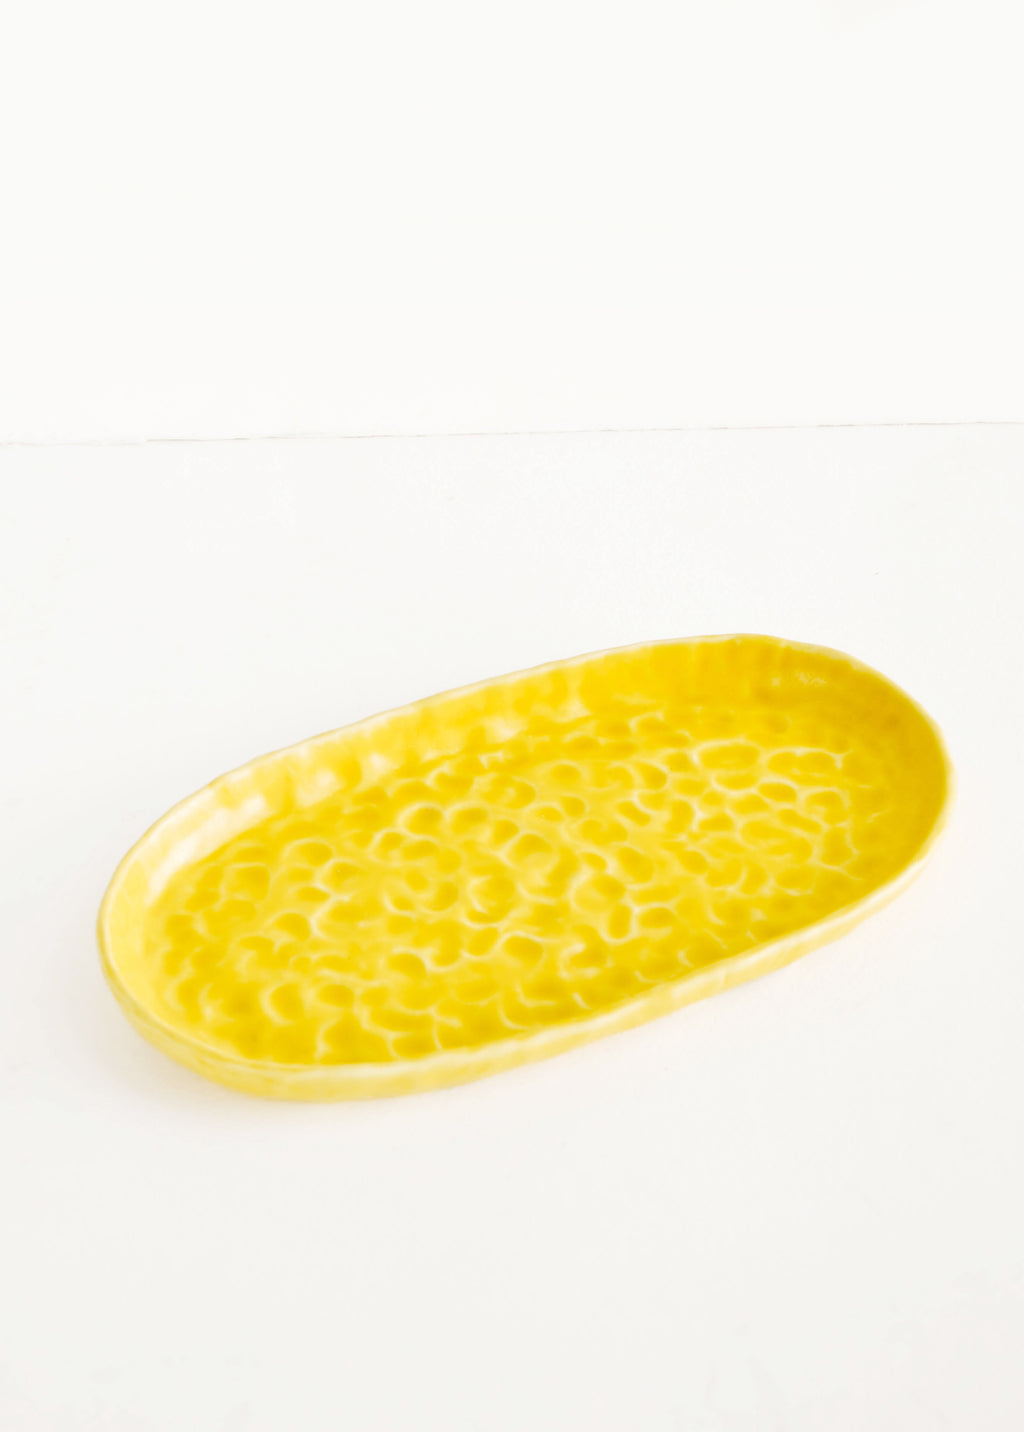 Daybreak: Dapple Textured Oval Shaped Ceramic Trays in Yellow  - LEIF